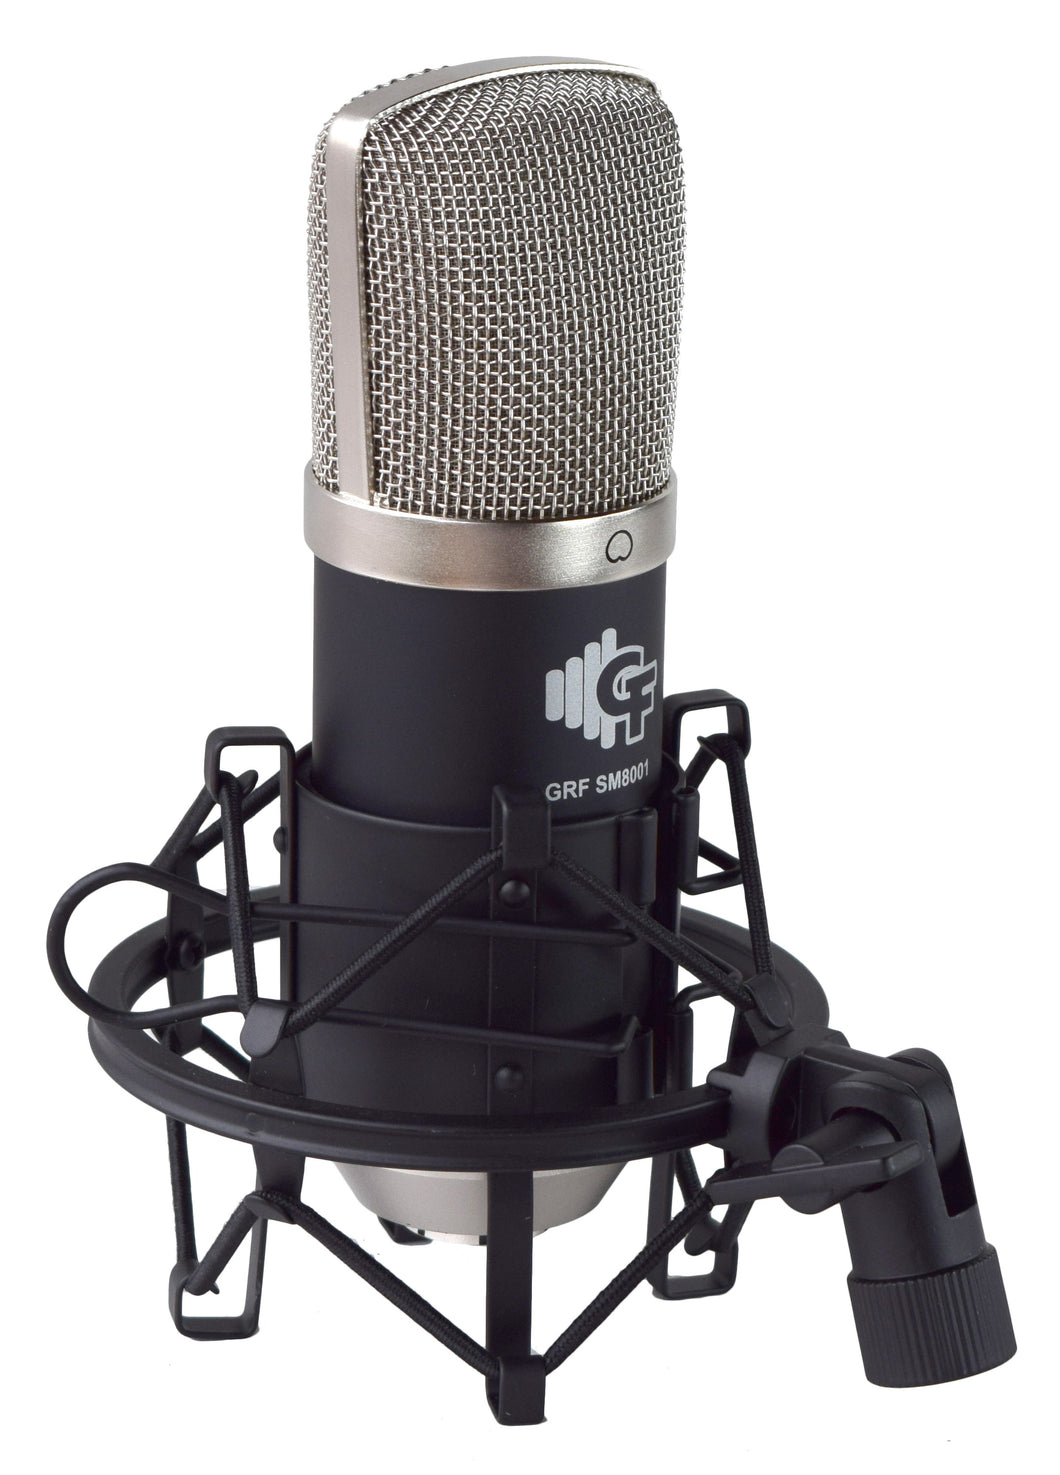 GROOVE FACTORY CONDENSER STUDIO MICROPHONE with SHOCK MOUNT & CARRYING BAG